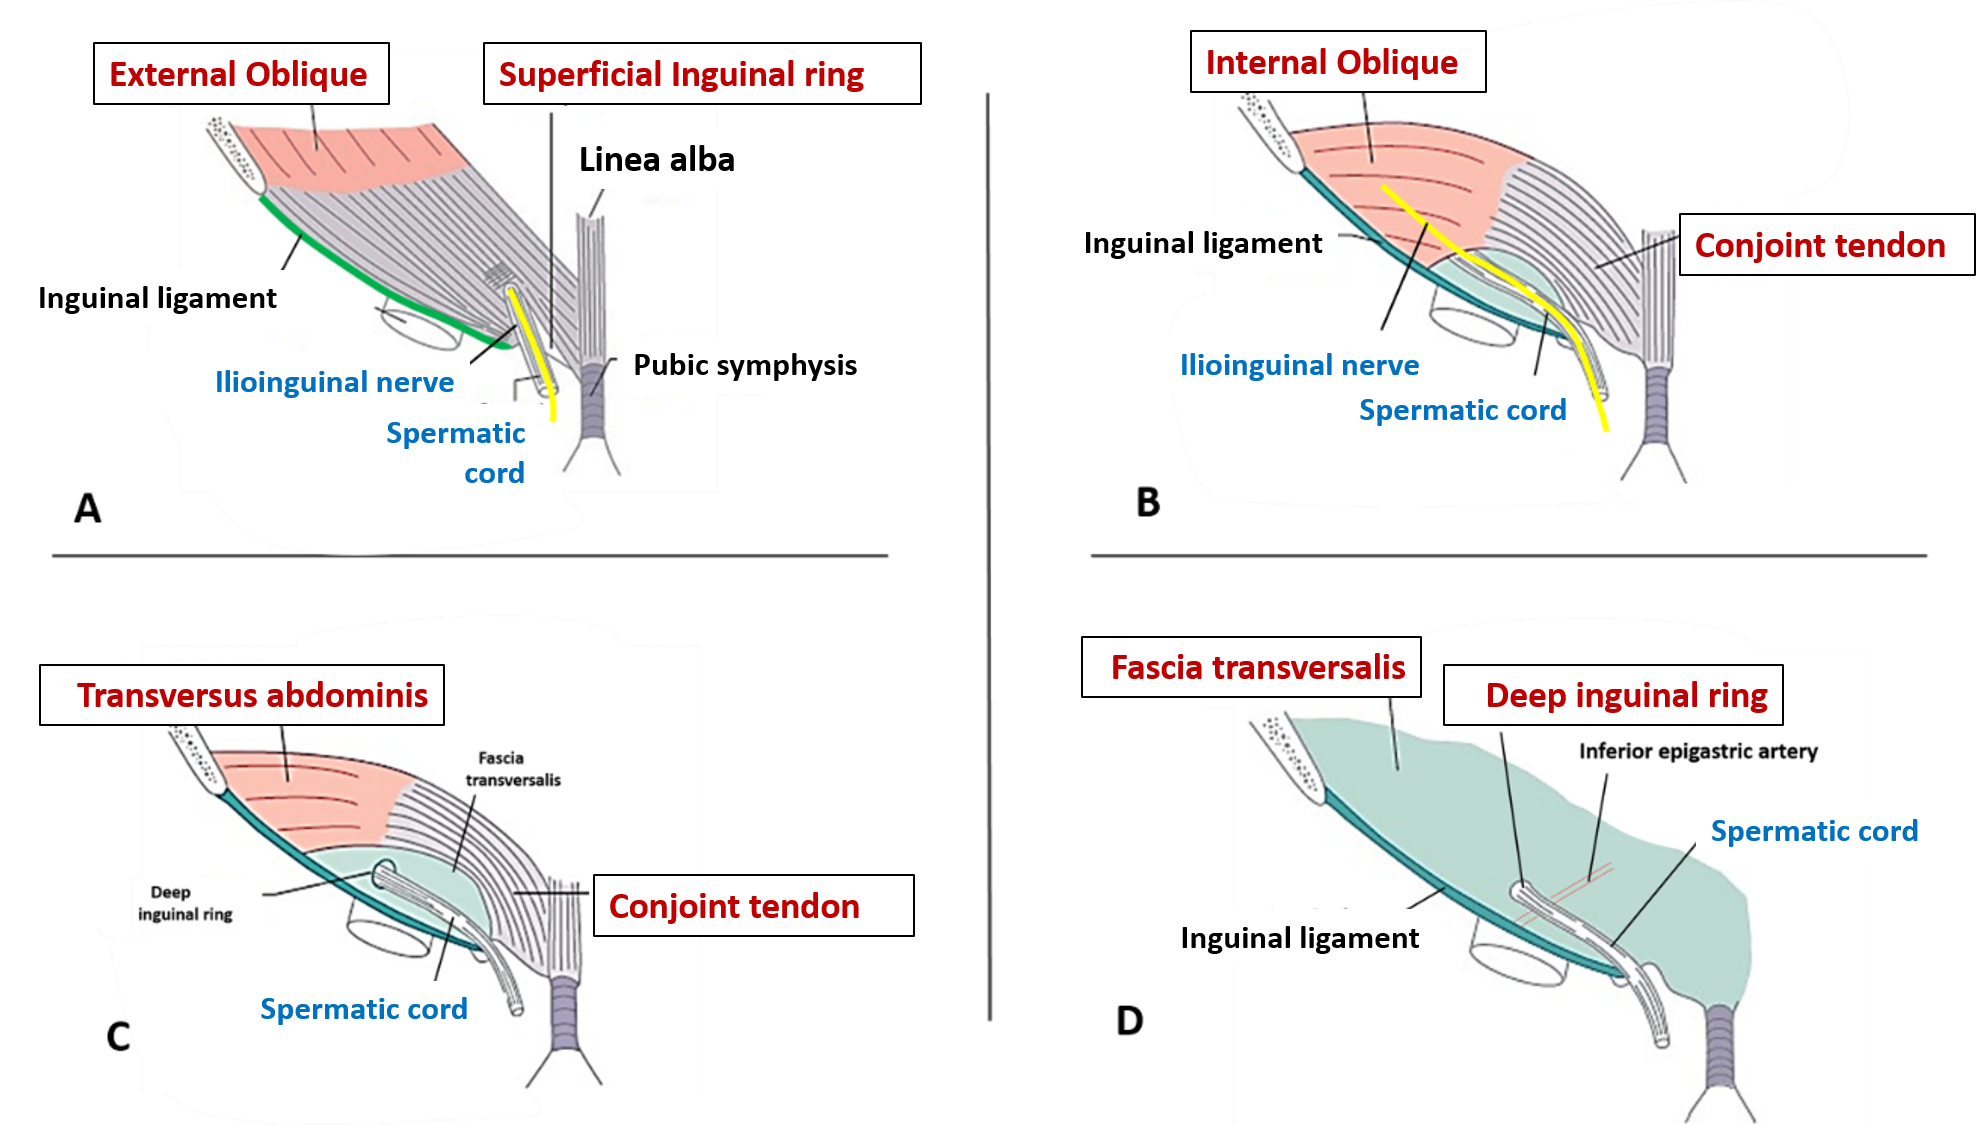 Formation, boundaries and contents of inguinal canal